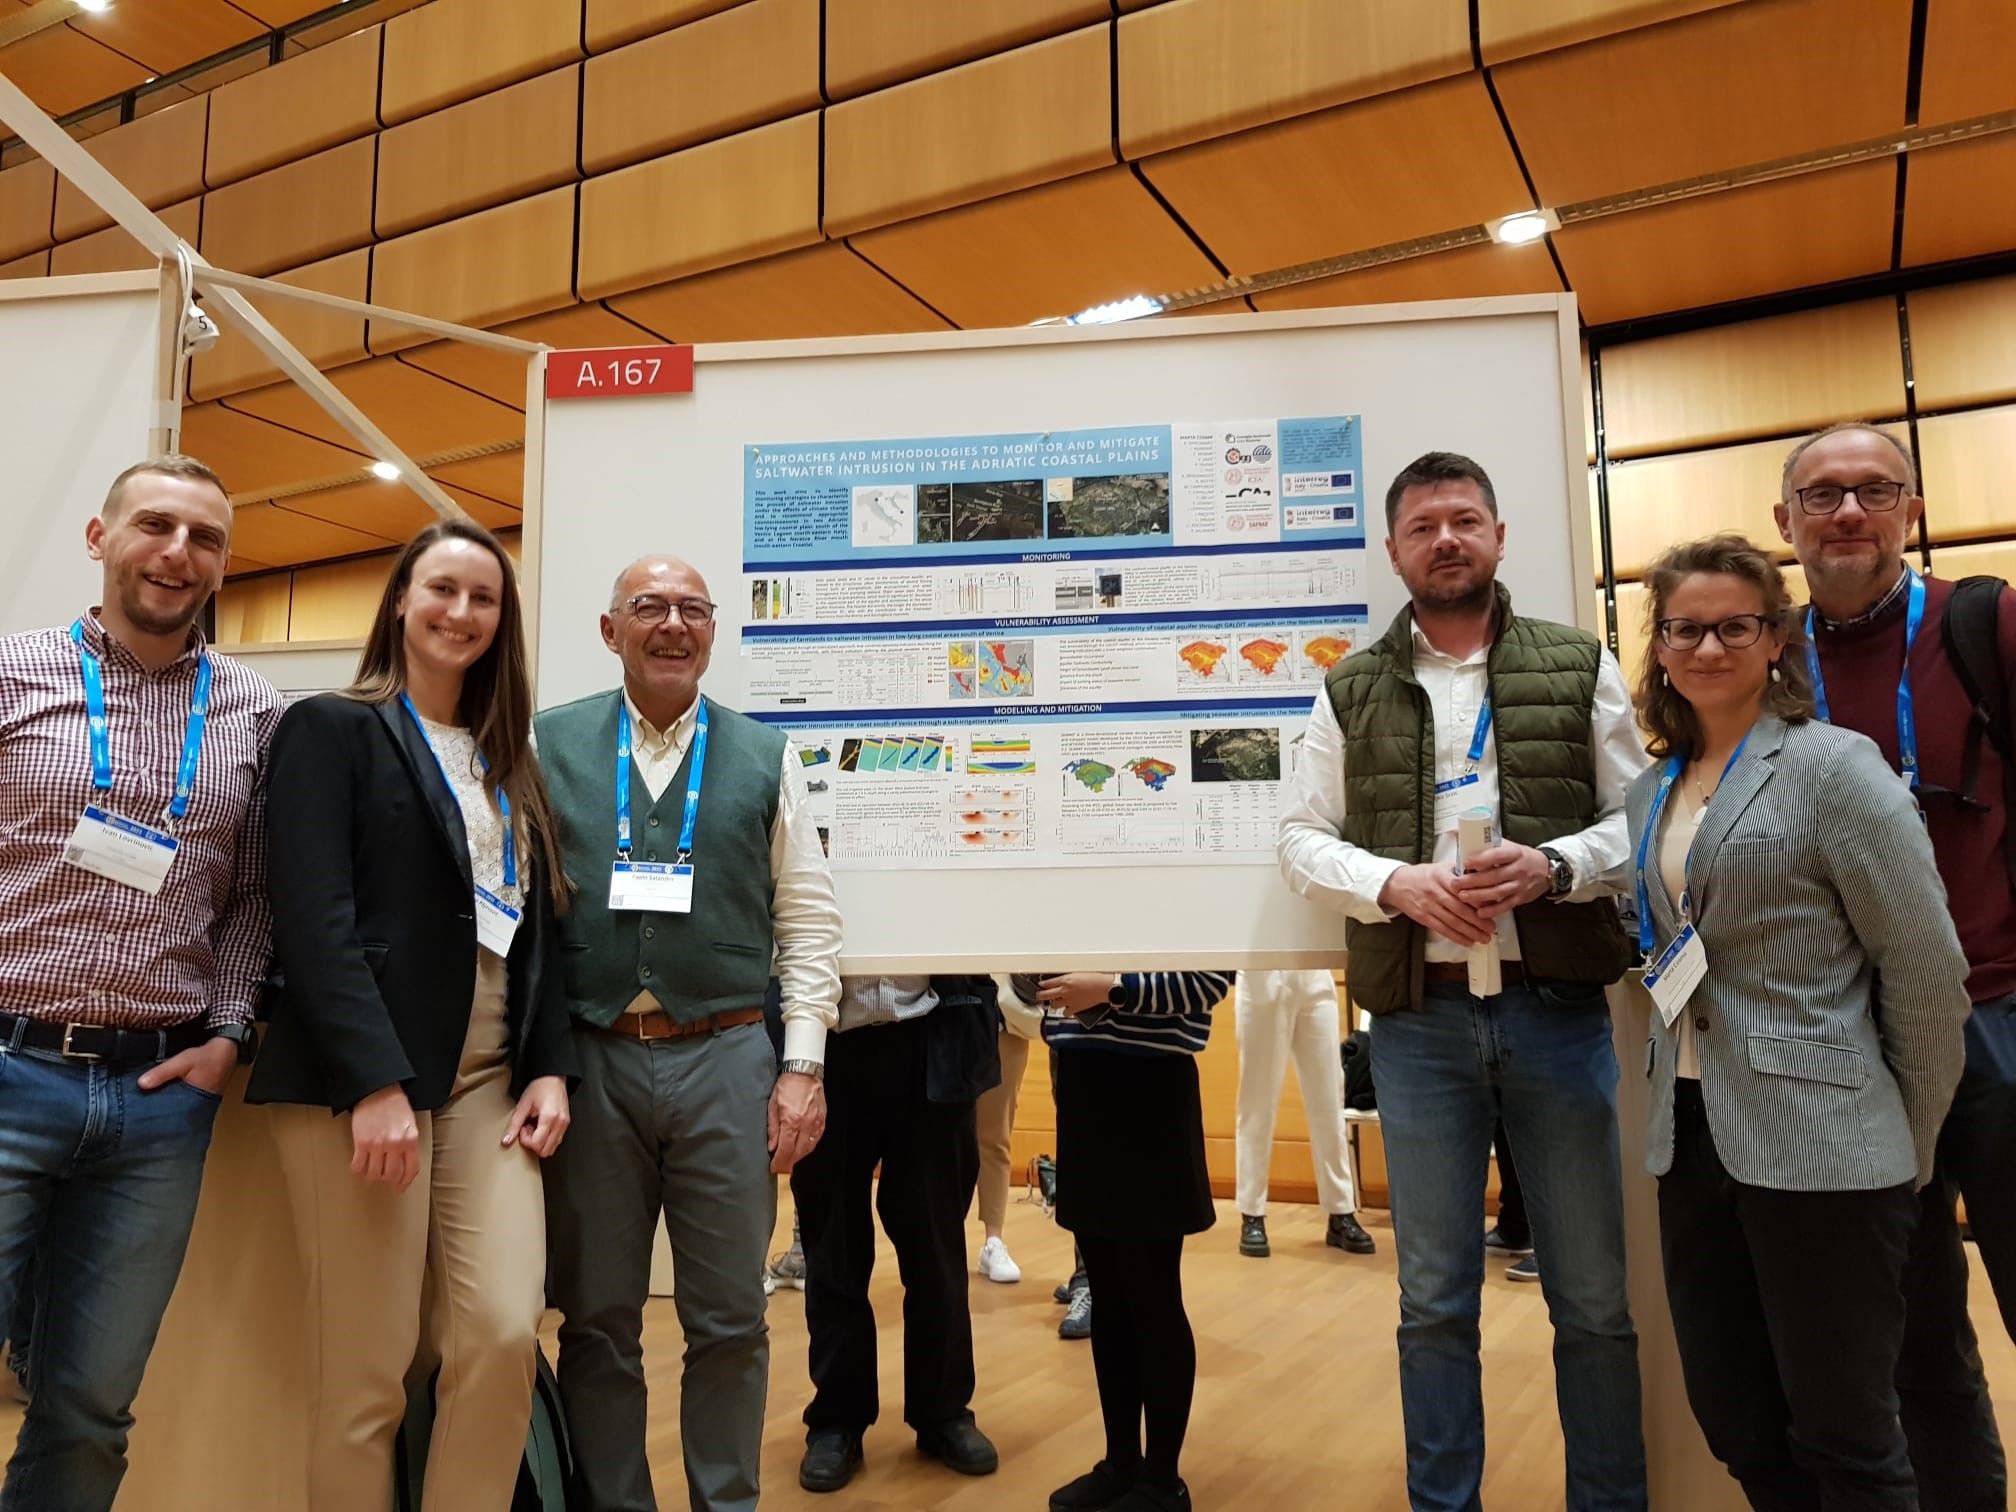 The EGU23 General Assembly